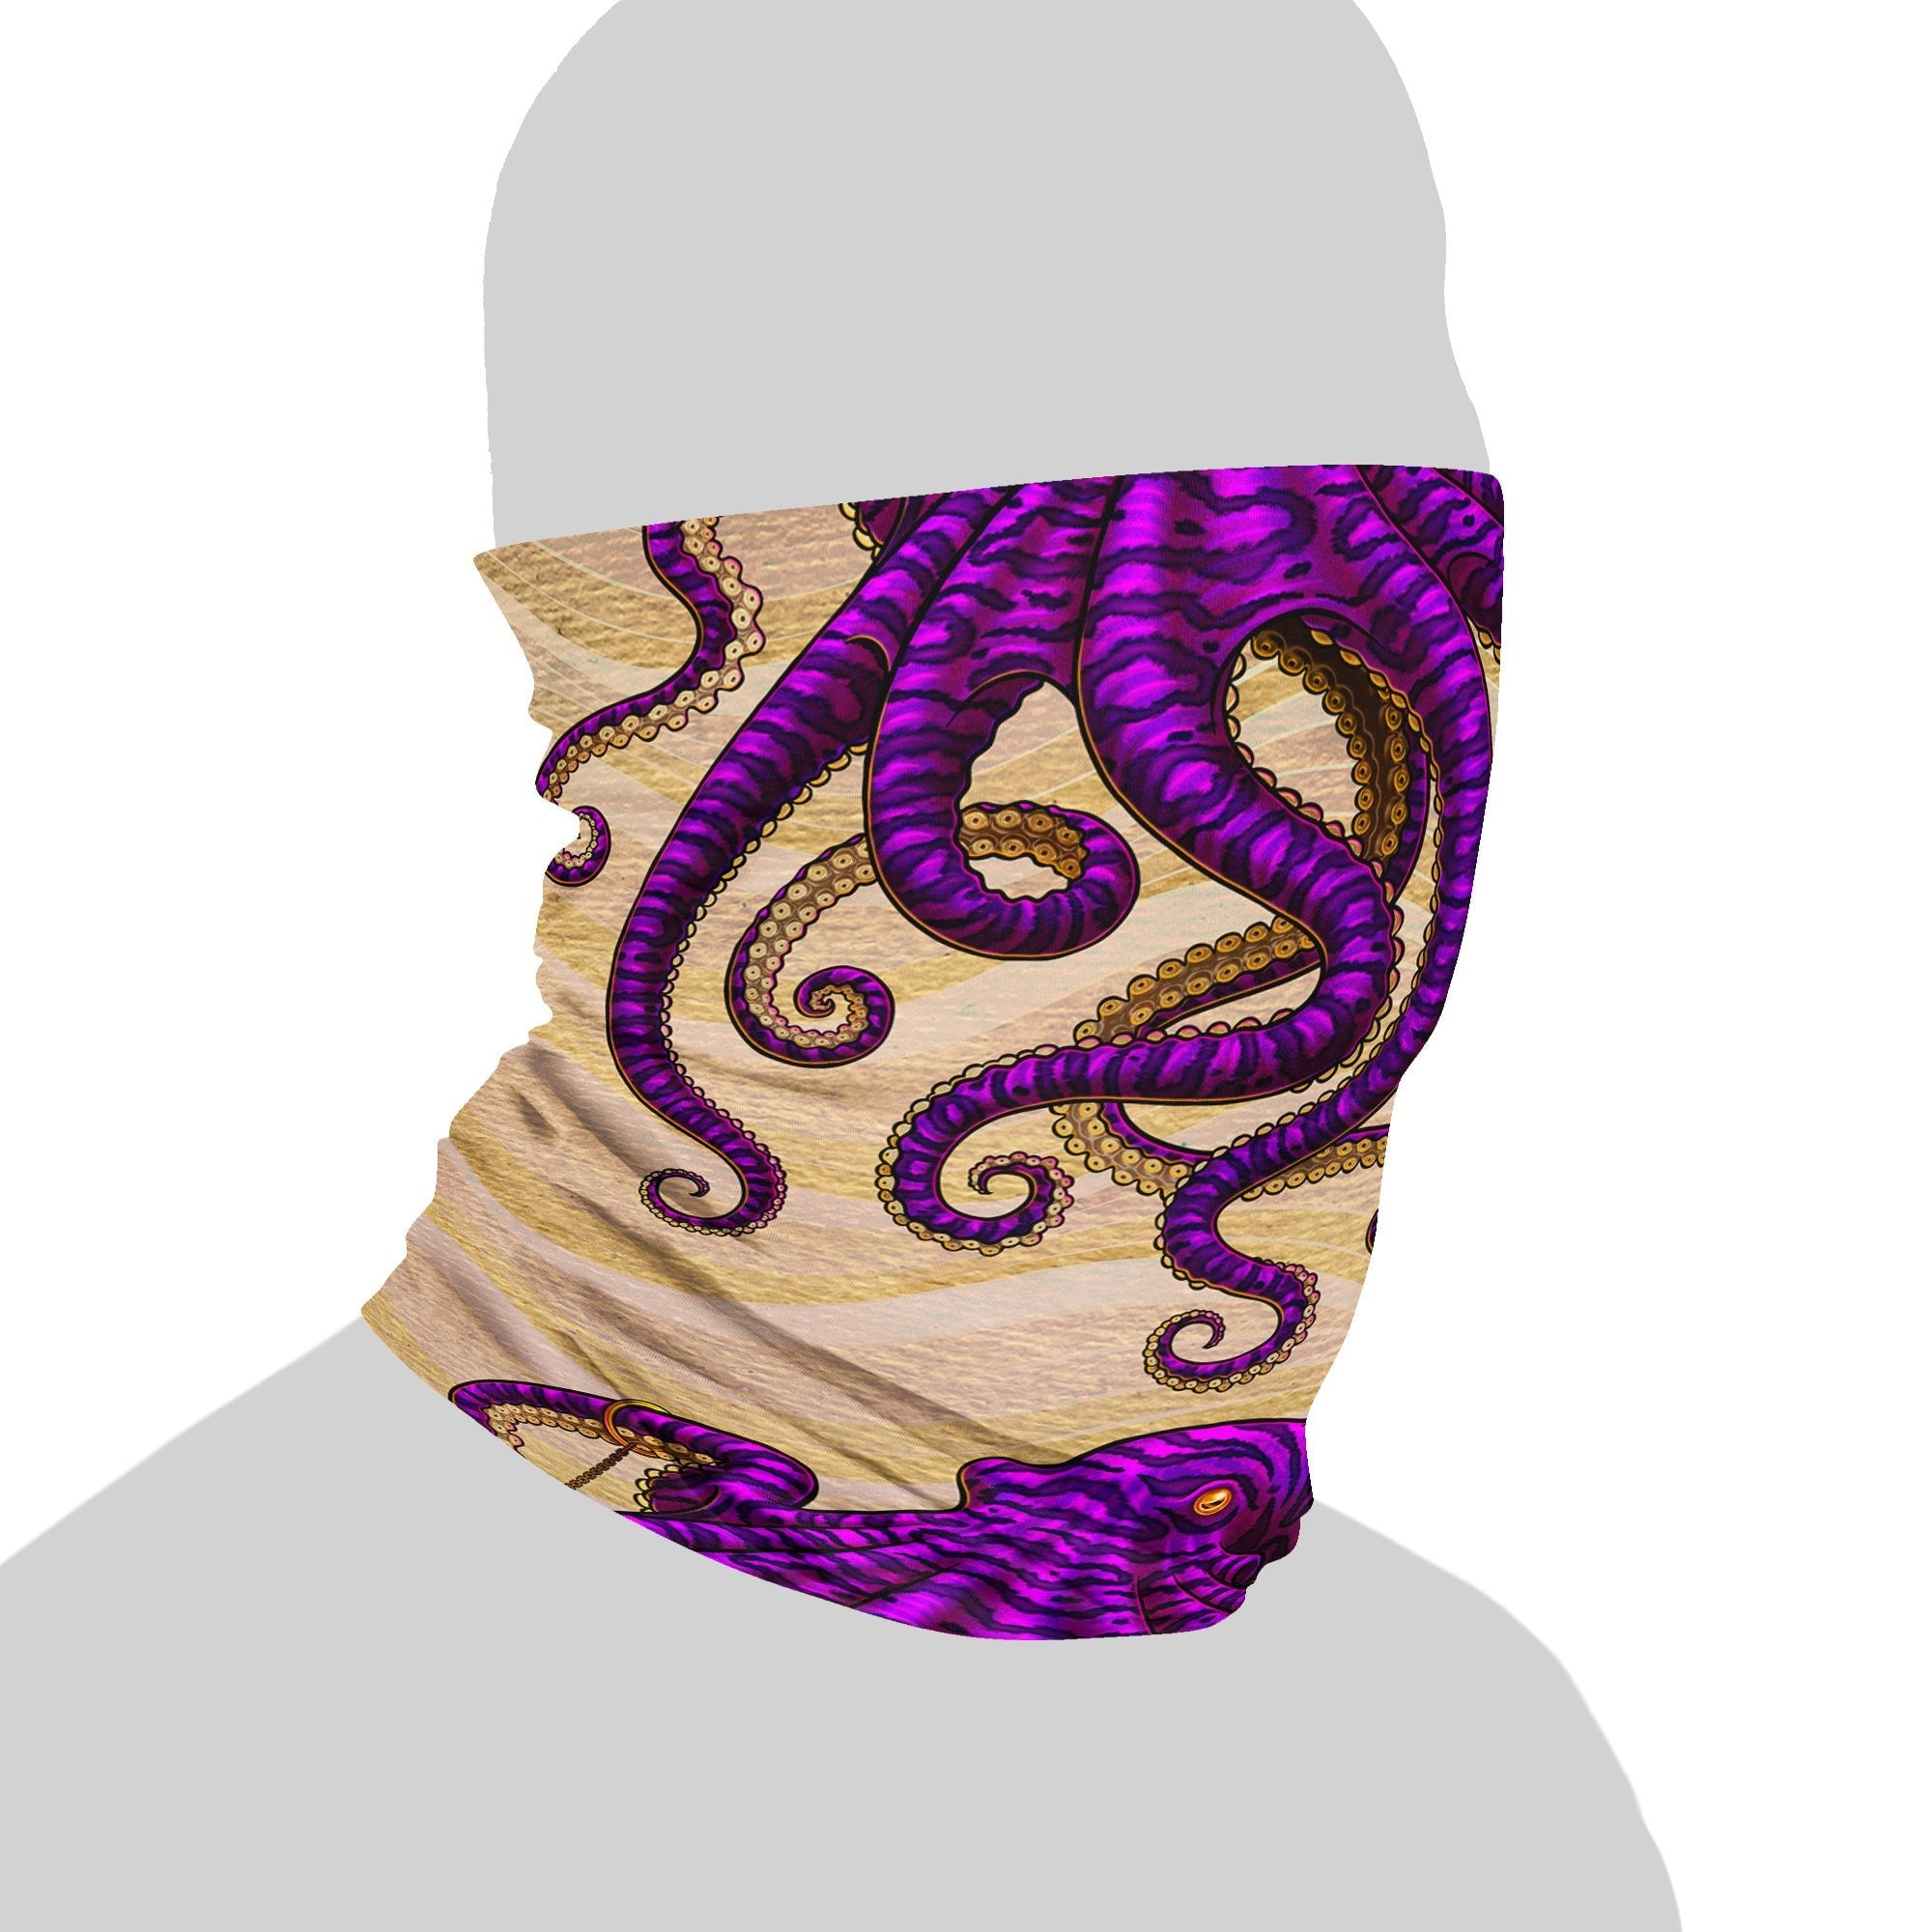 Tentacles Neck Gaiter, Face Mask, Head Covering, Octopus Art, Indie Outfit - Purple & Sand - Abysm Internal